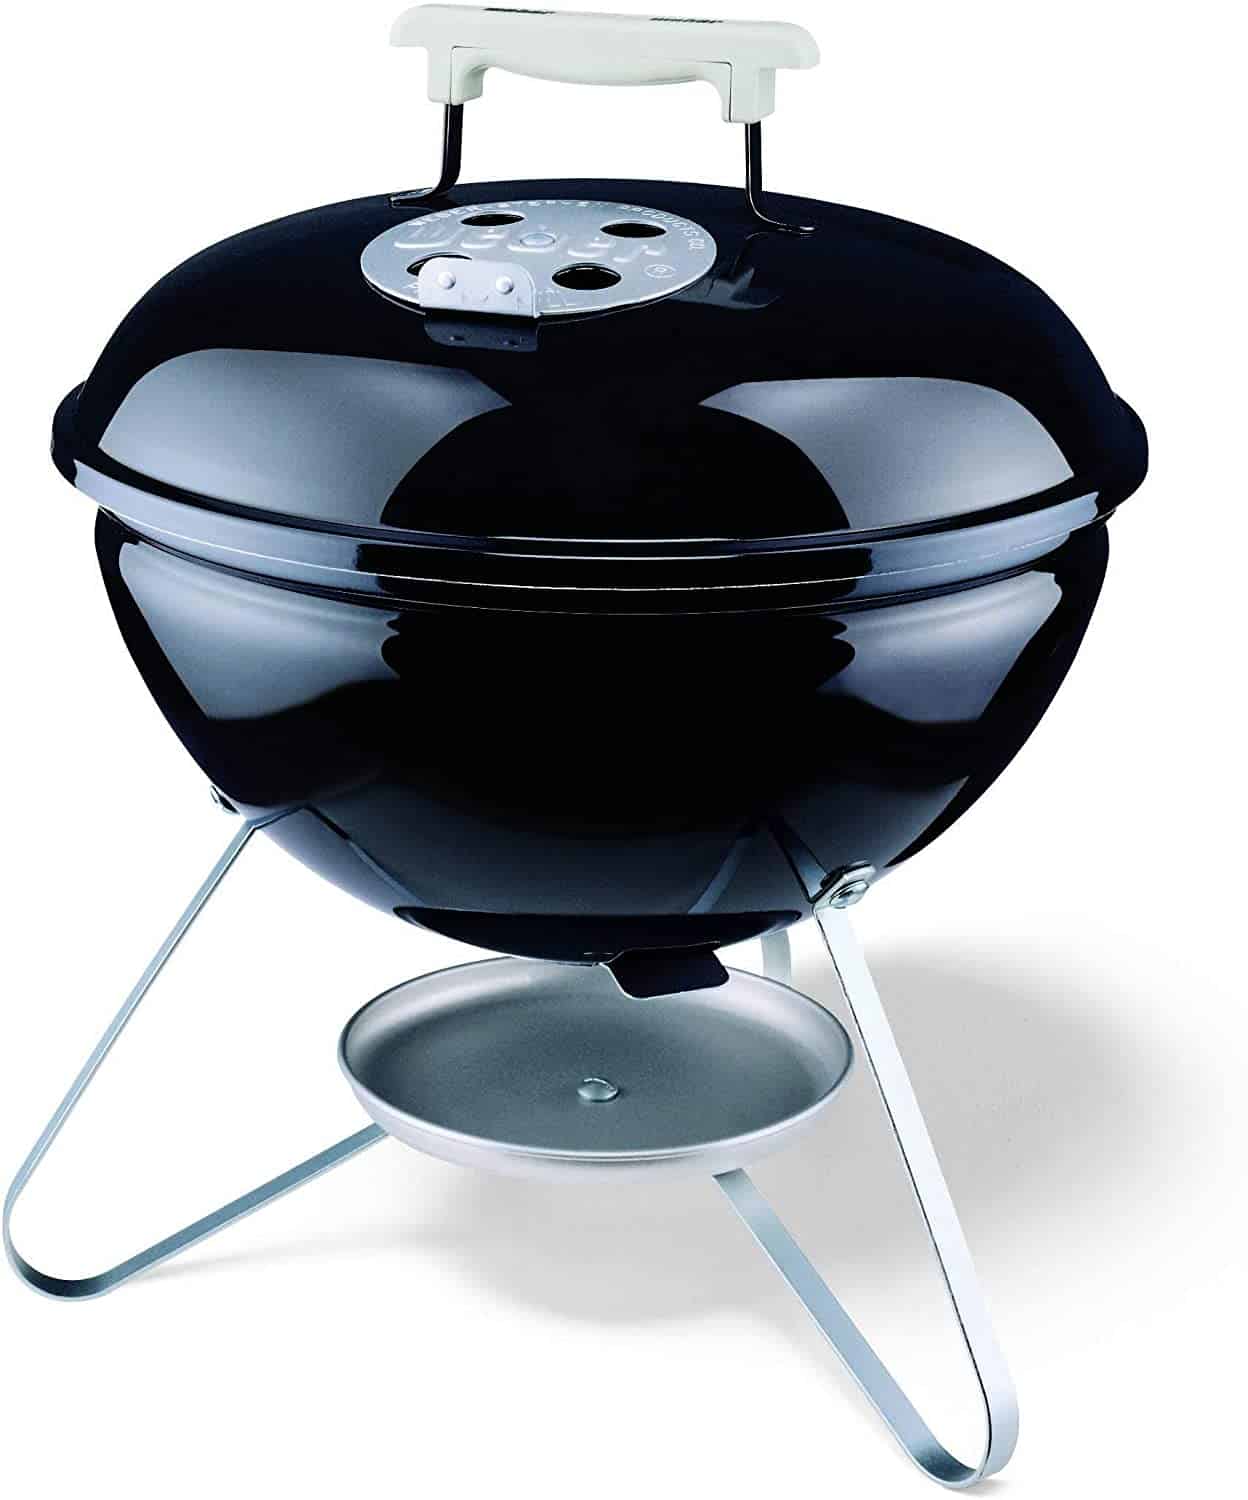 Best small charcoal grill for mobility- Weber Smokey Joe